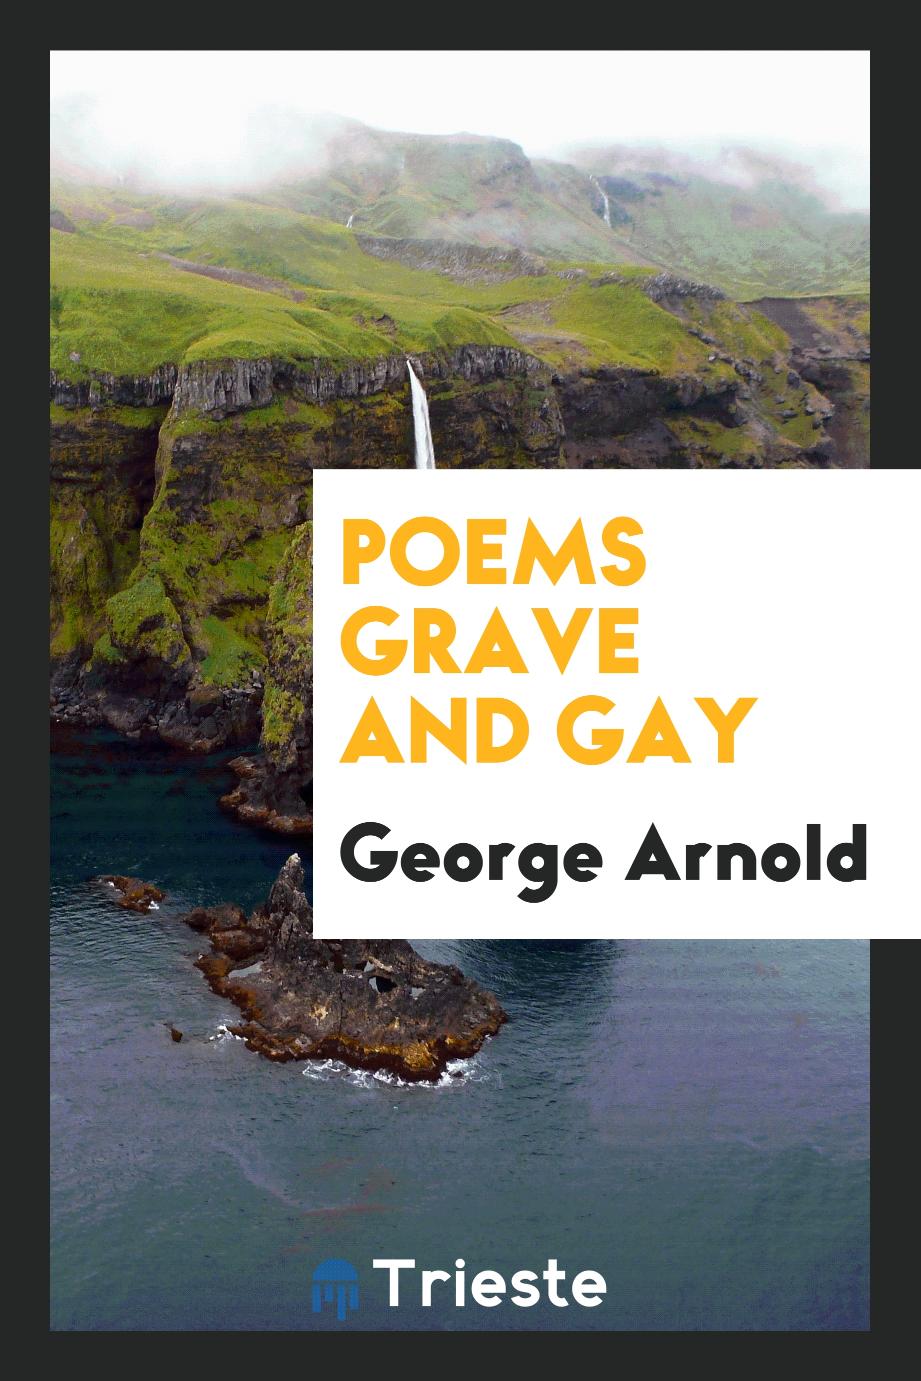 Poems grave and gay